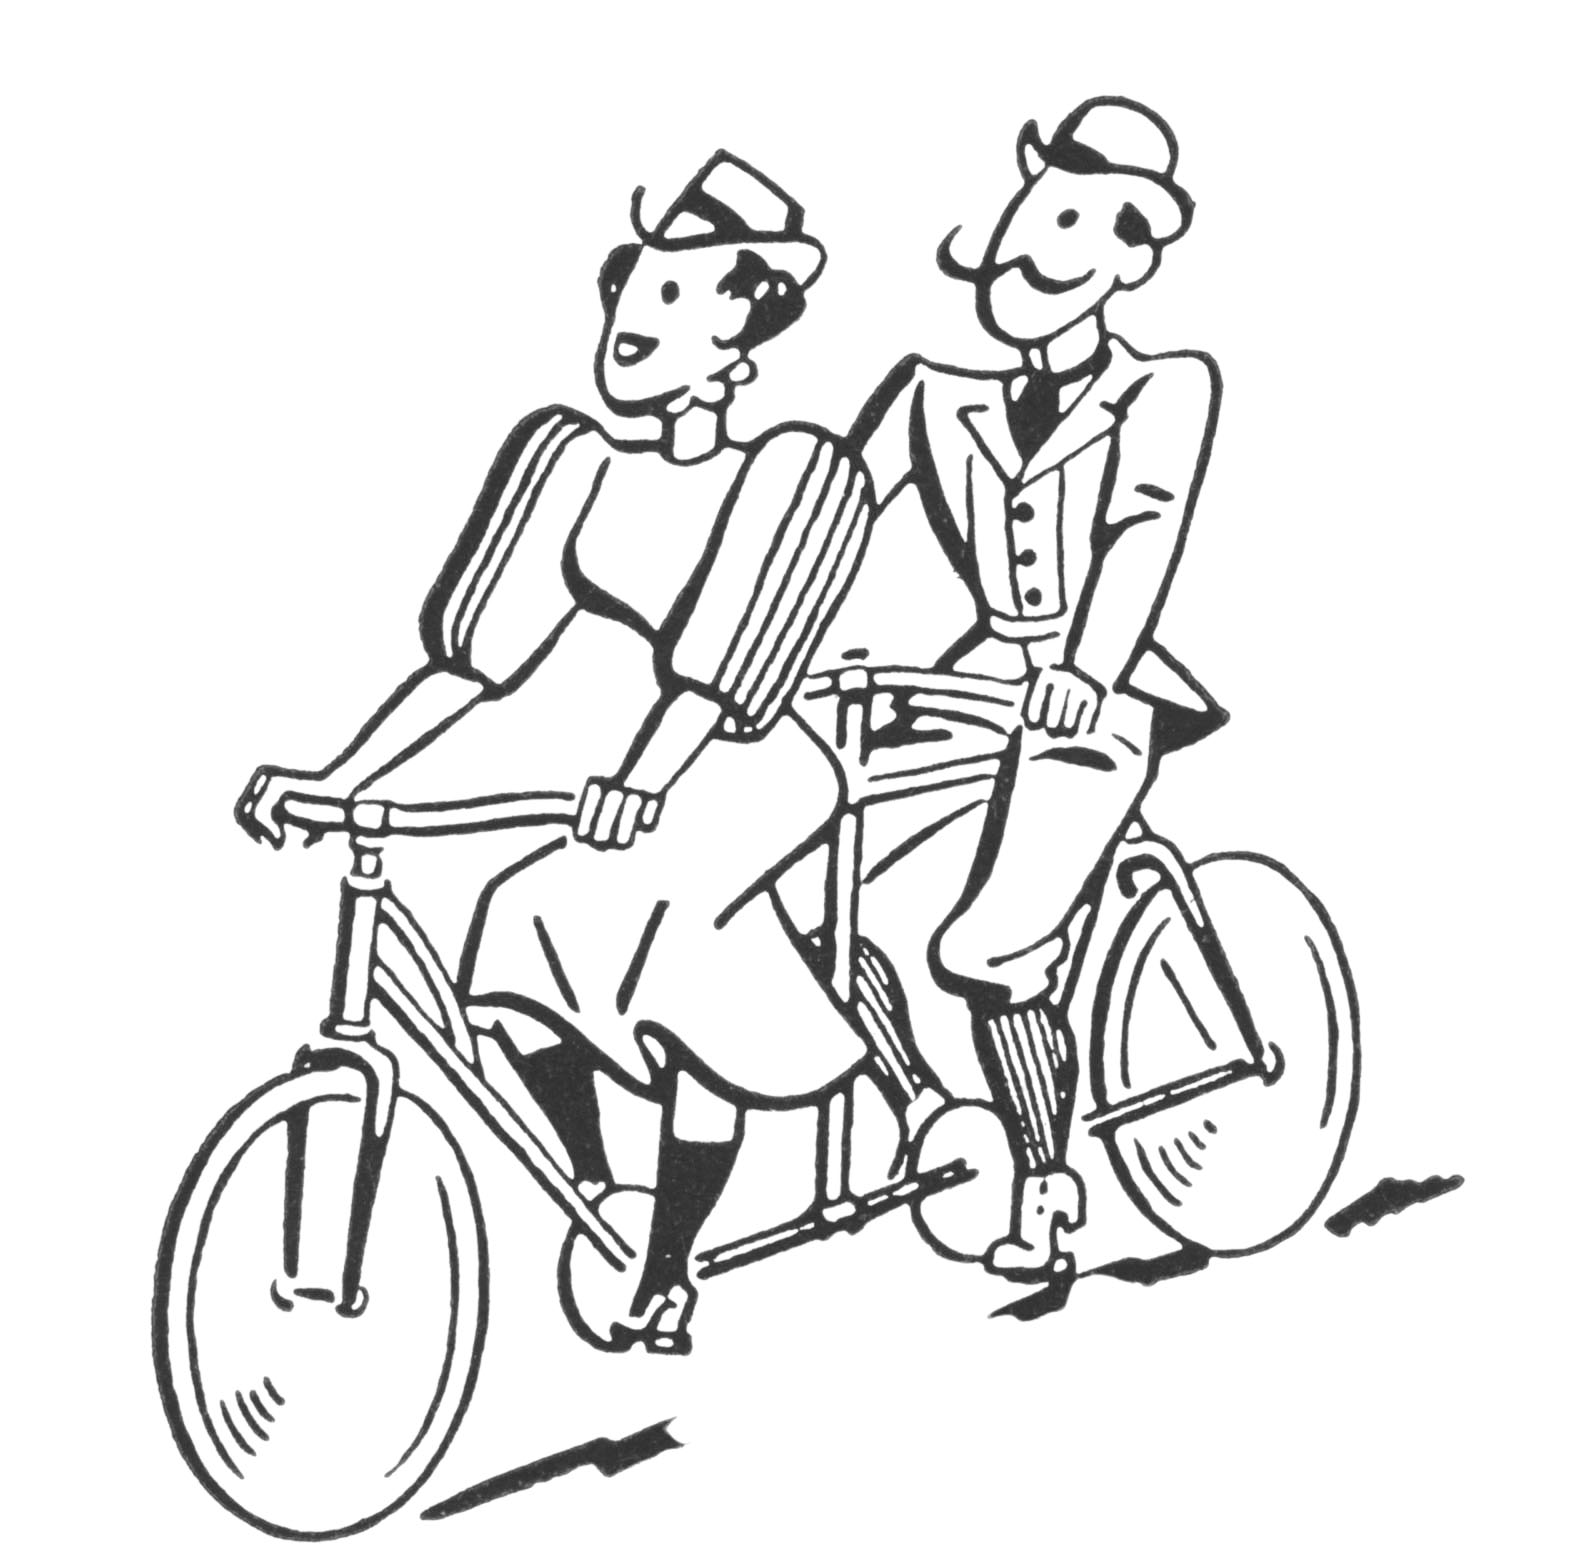 Tandem Bicycle Clipart